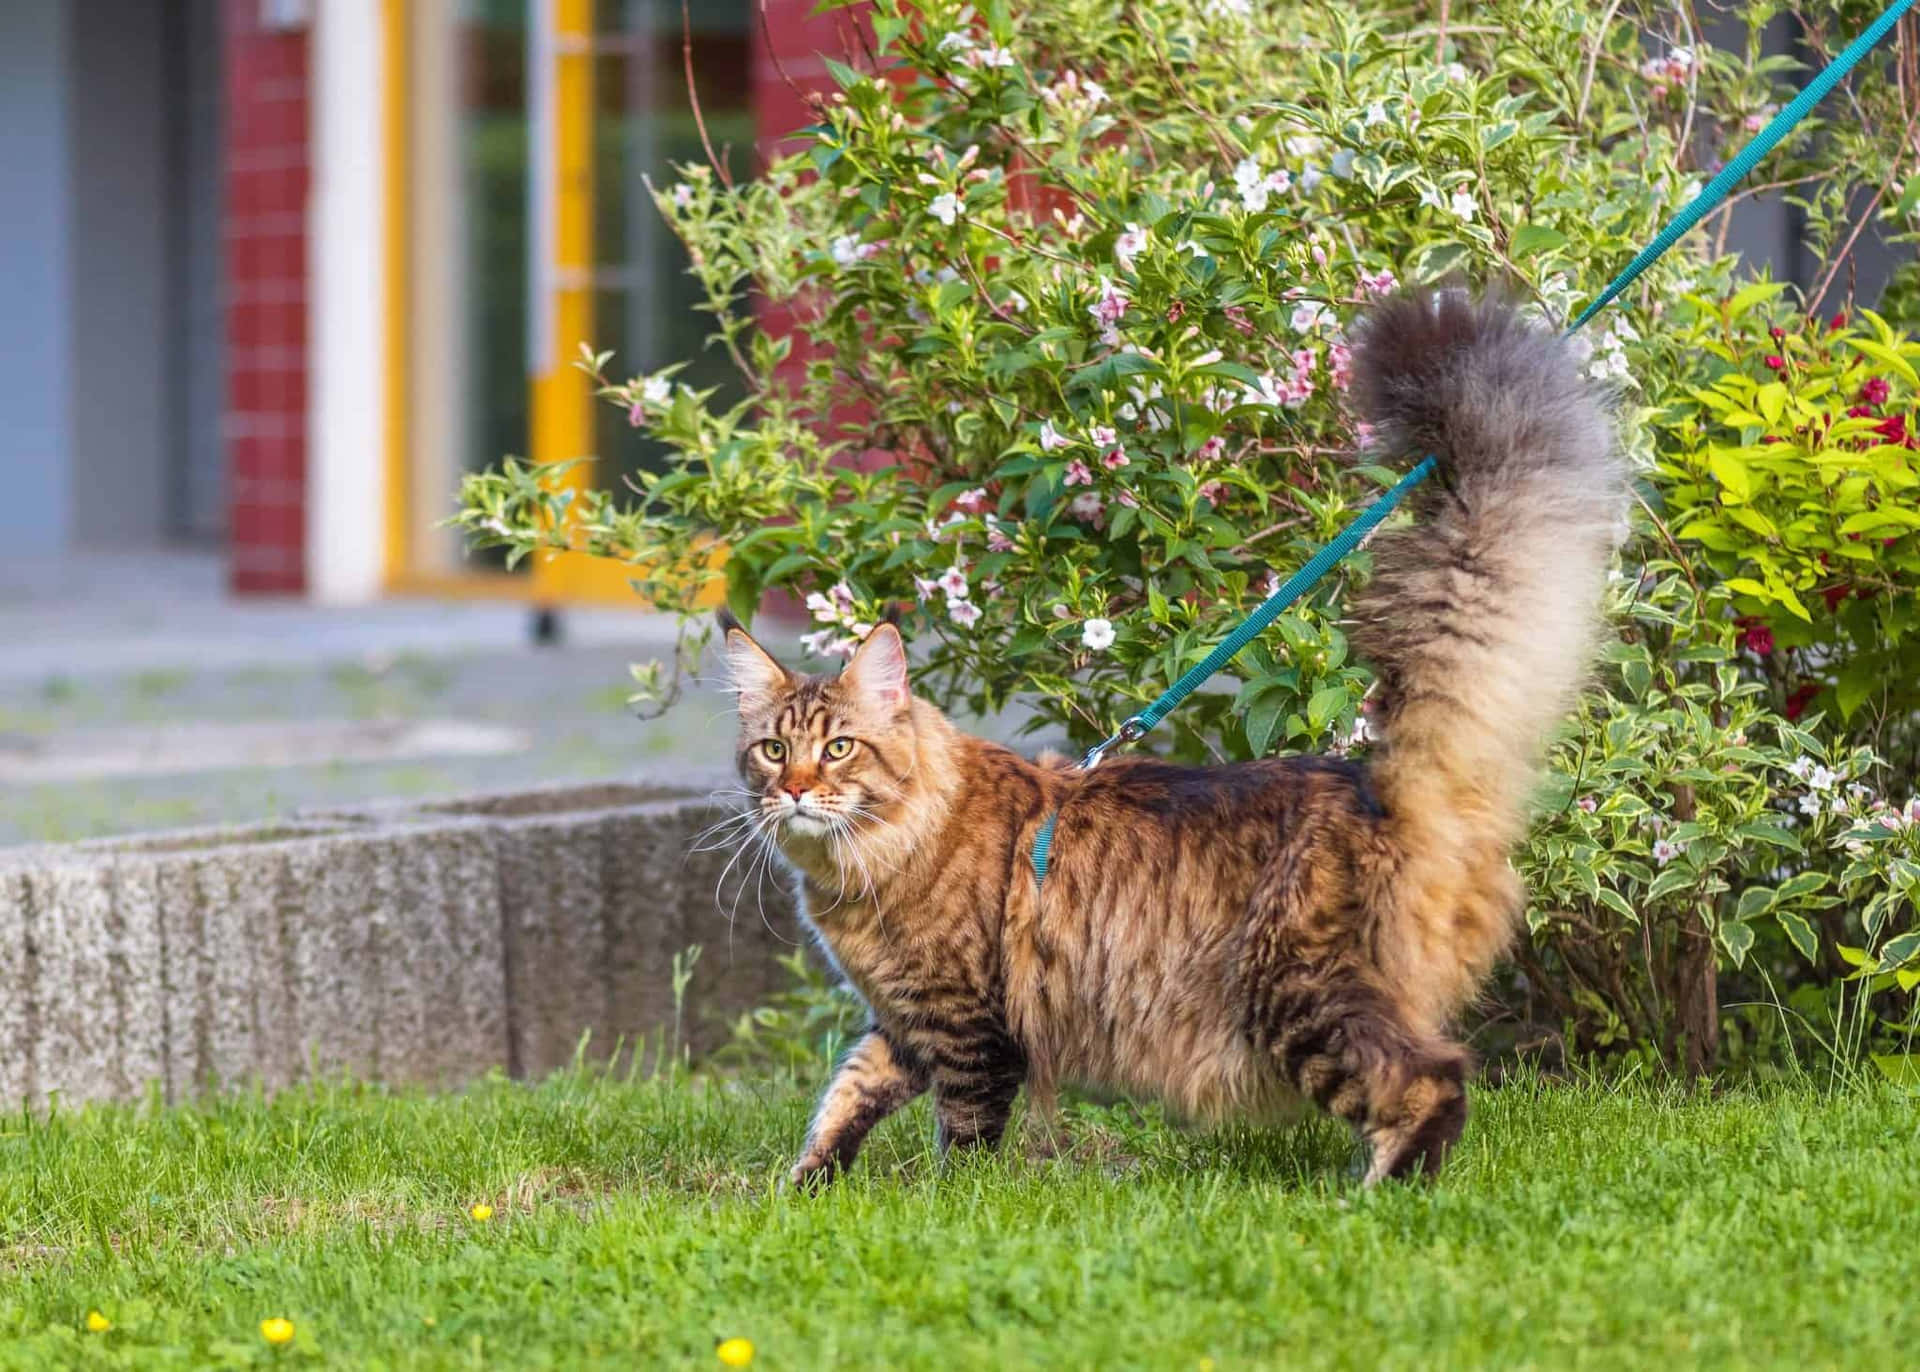 A Cat Walking On A Leash In The Grass